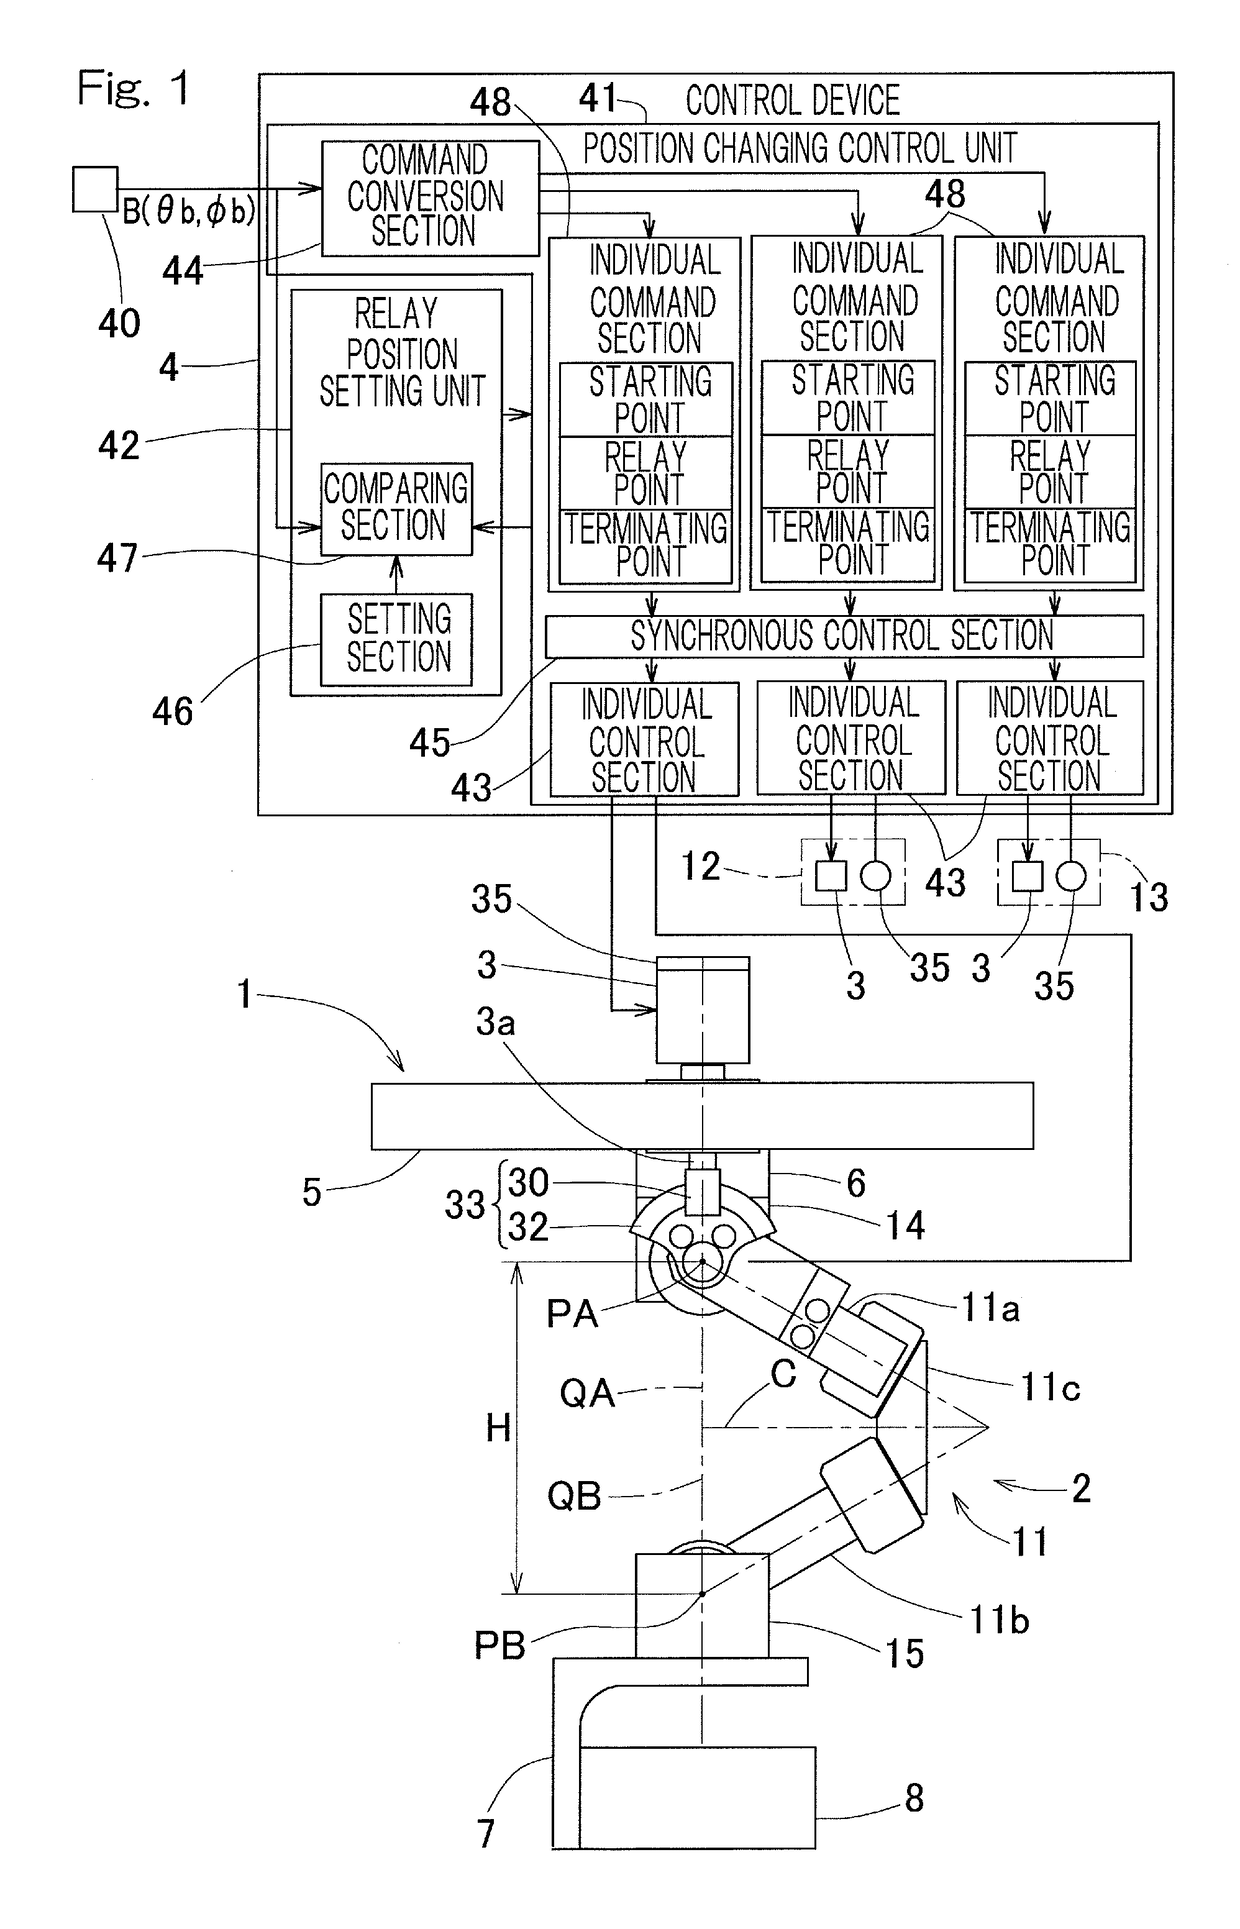 Linking apparatus control device